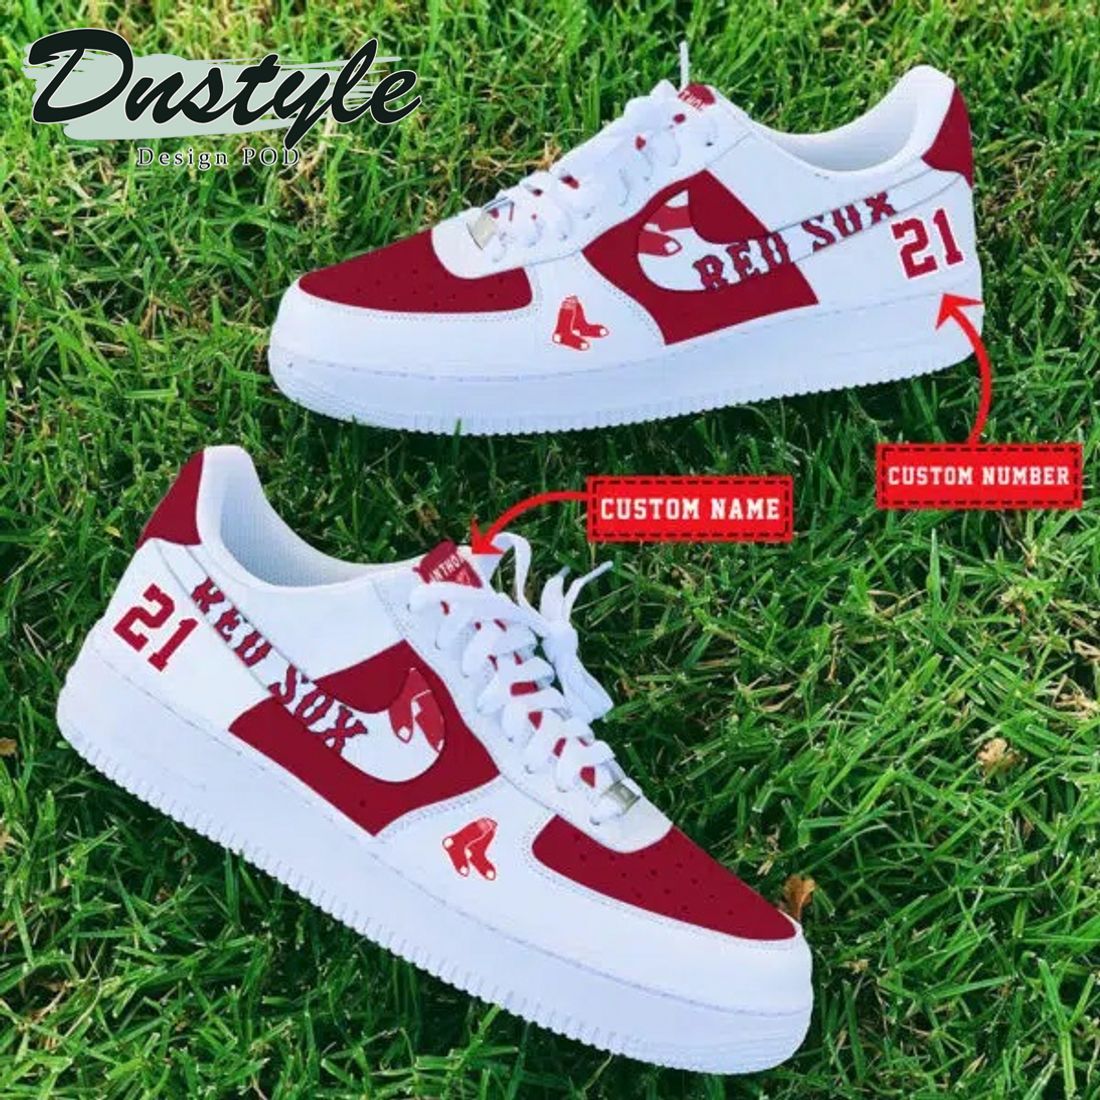 MLB Boston Red Sox Personalized Name Number Nike Air Force 1 Sneakers 2